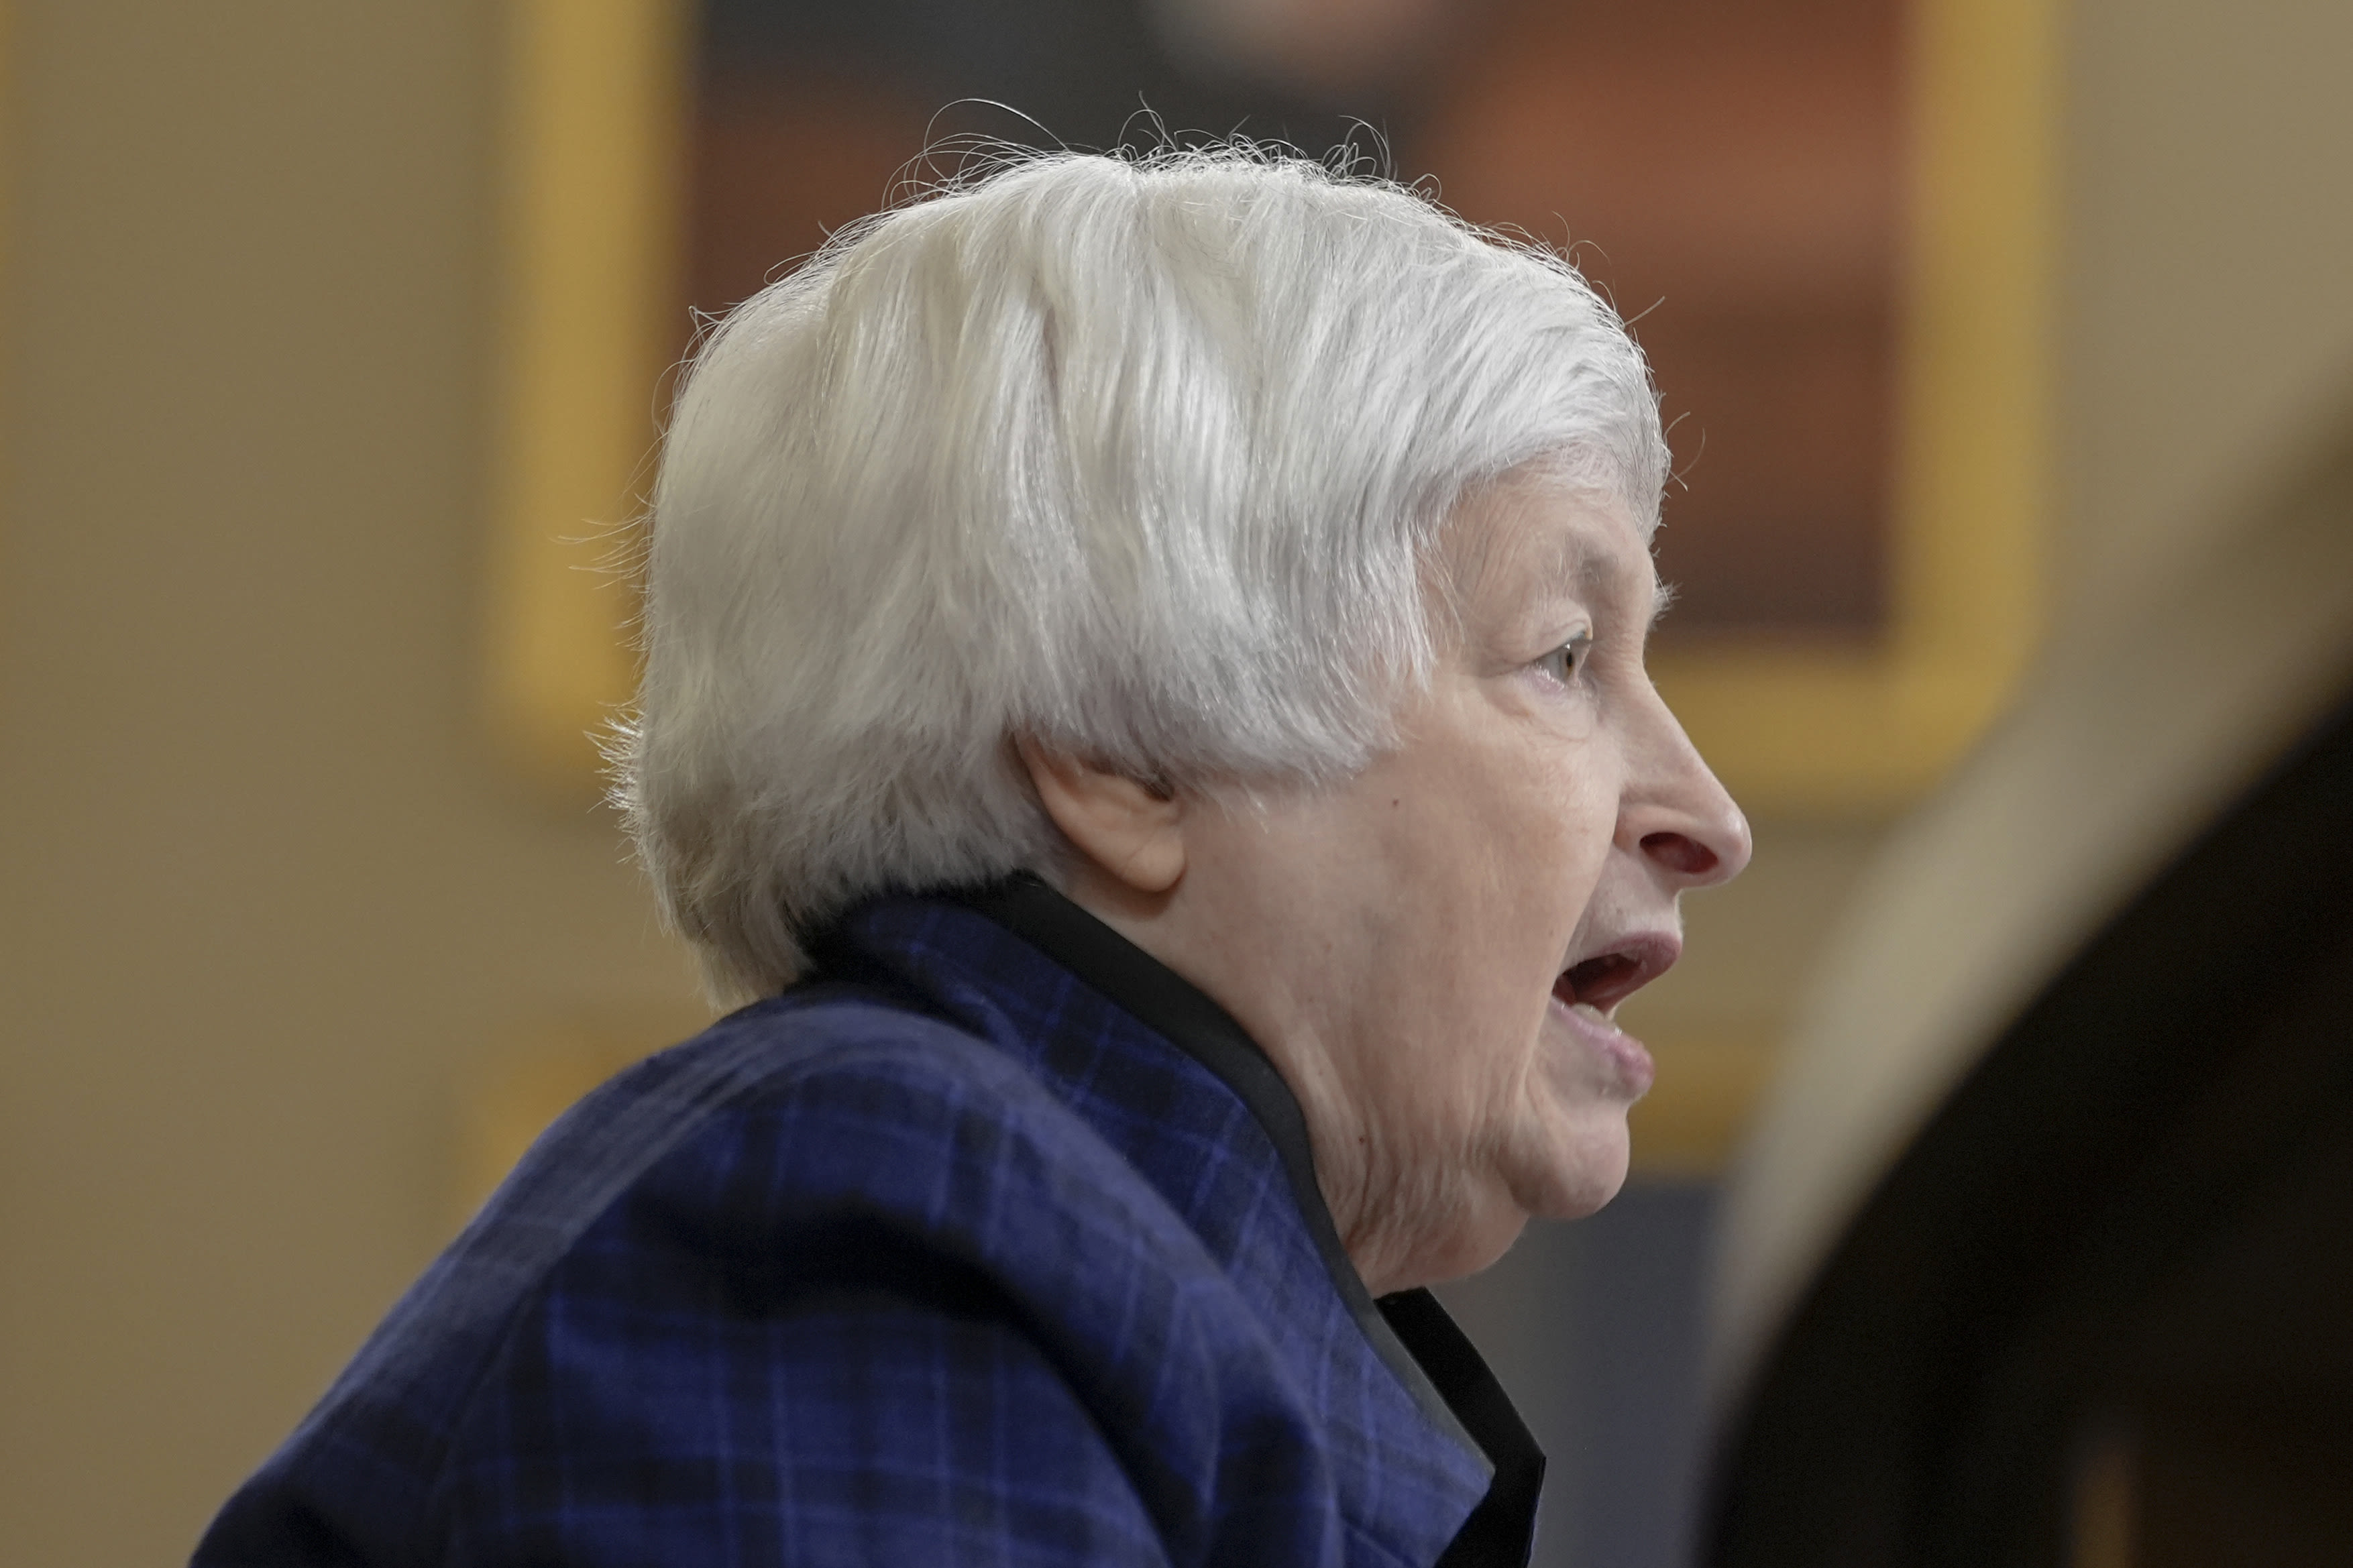 Yellen defends Fed independence as Trump allies push plans for more control